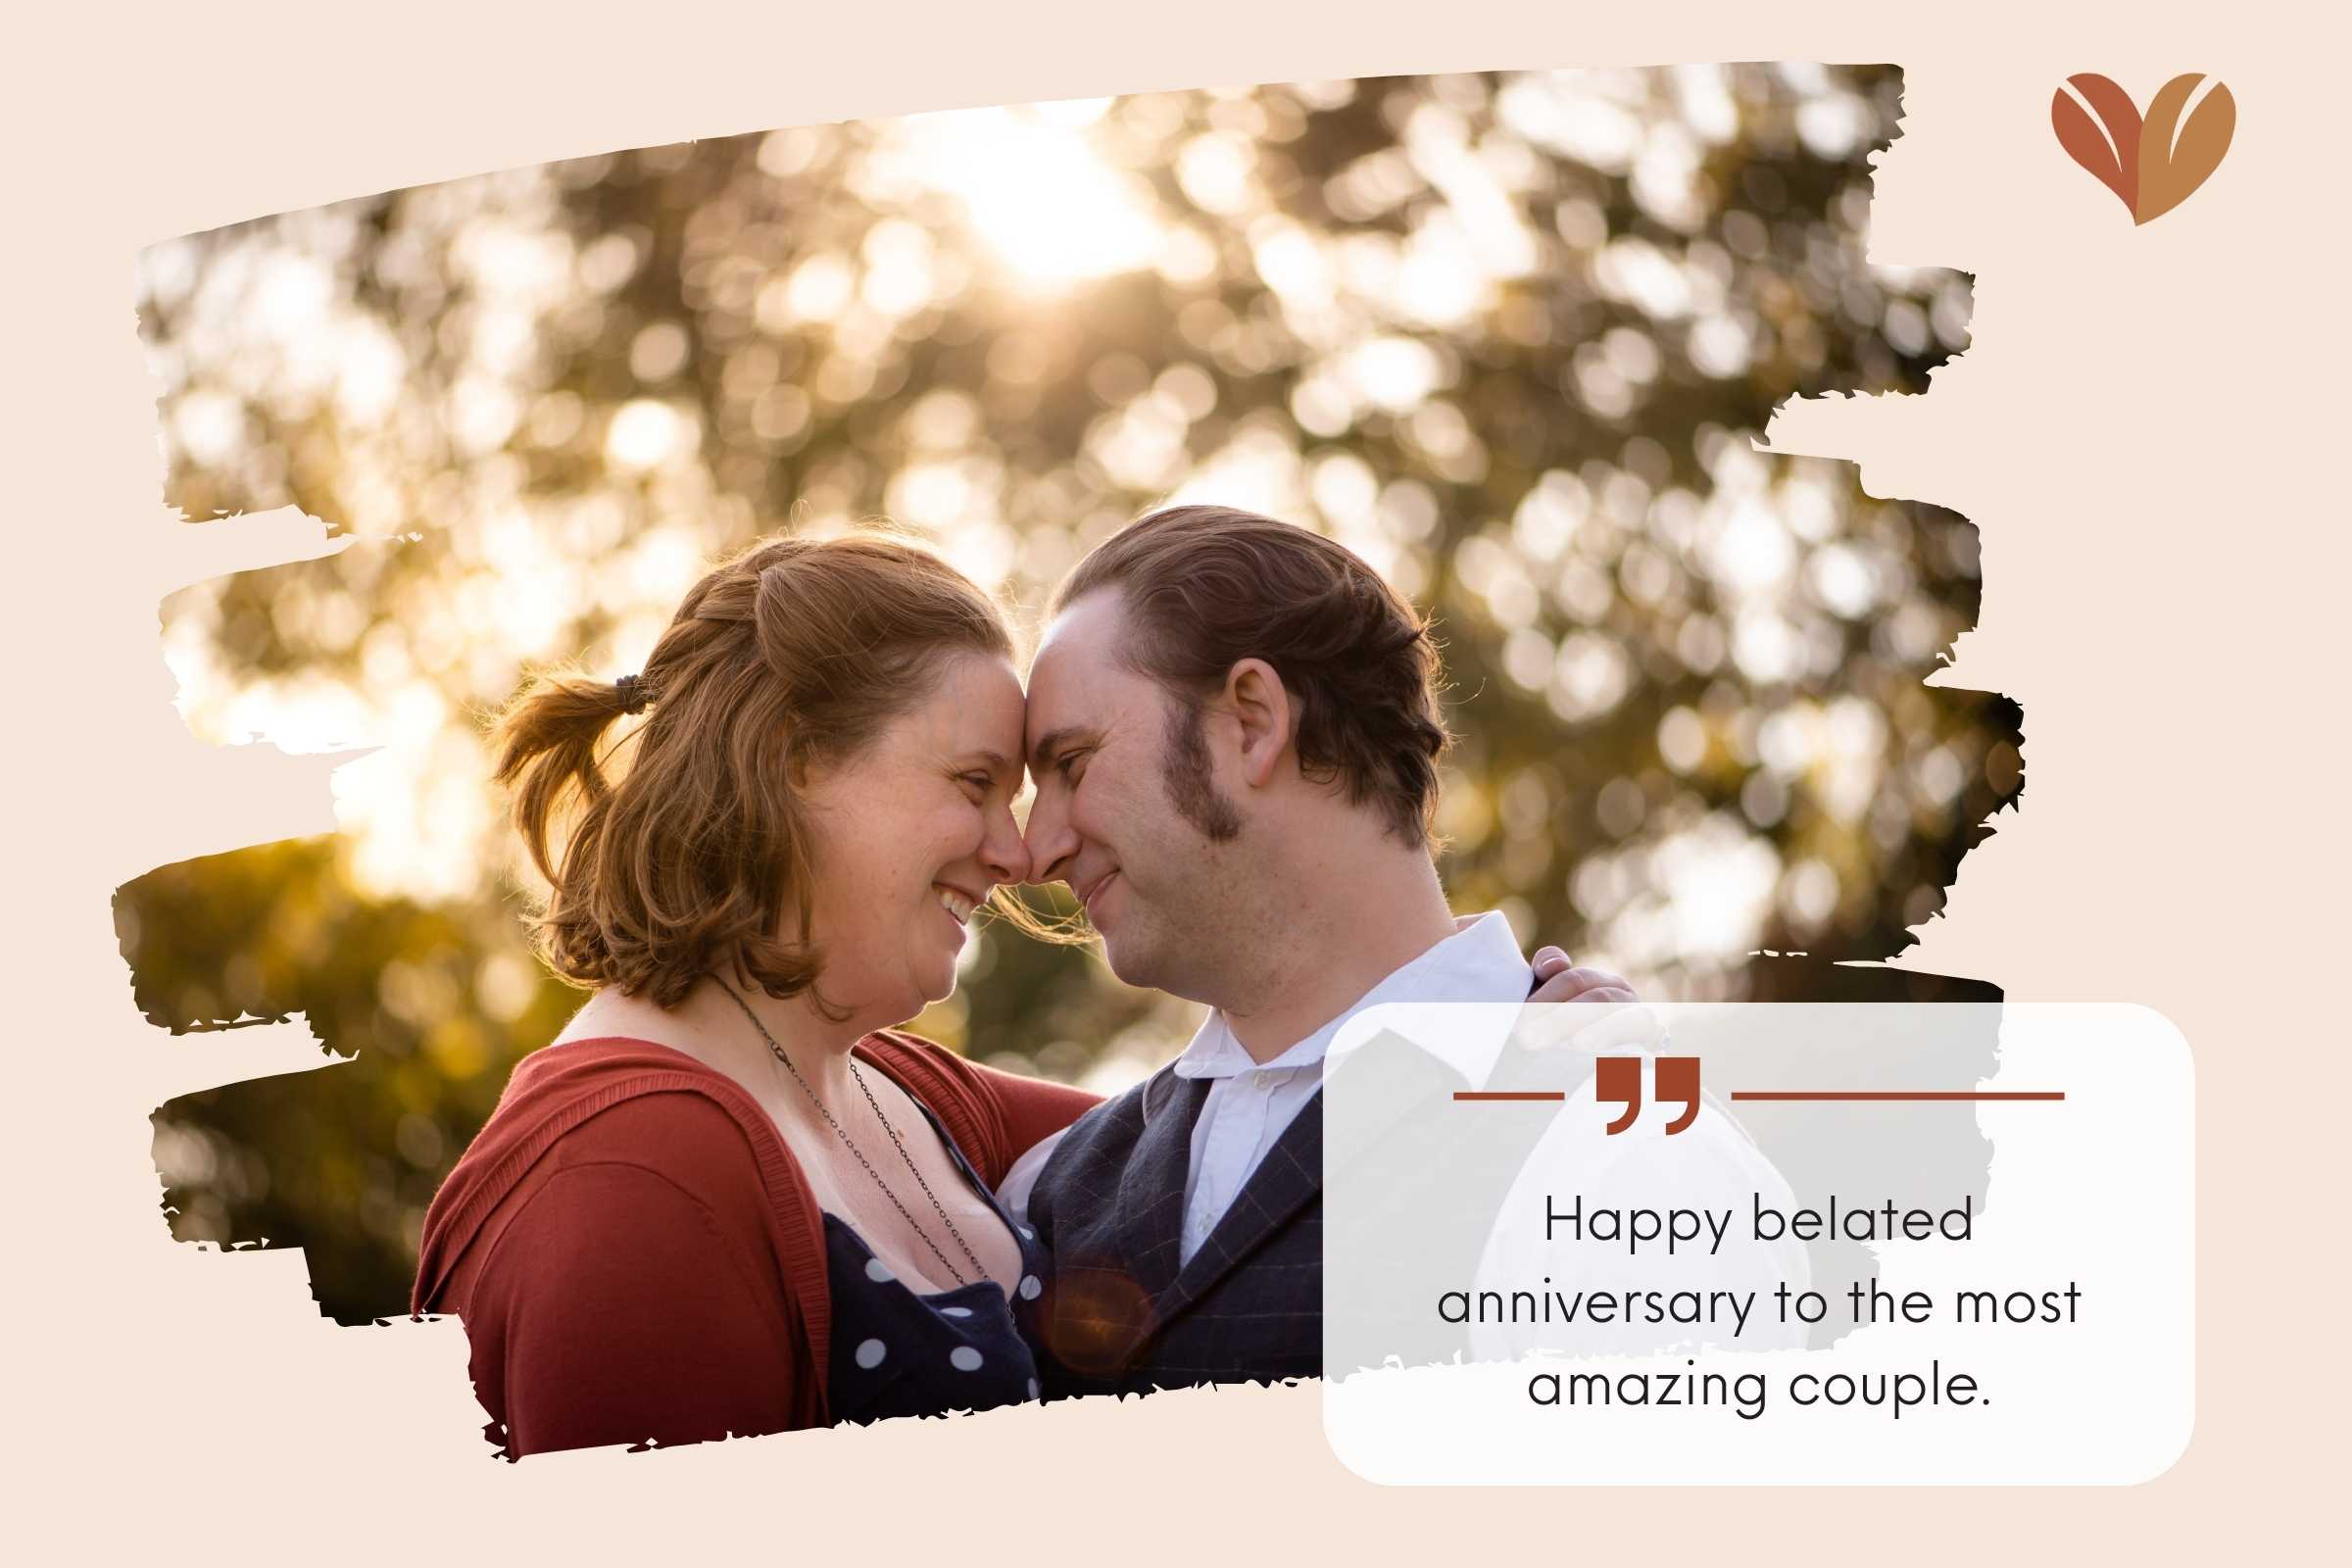 As your love story unfolds, we send our best anniversary wishes for couple!